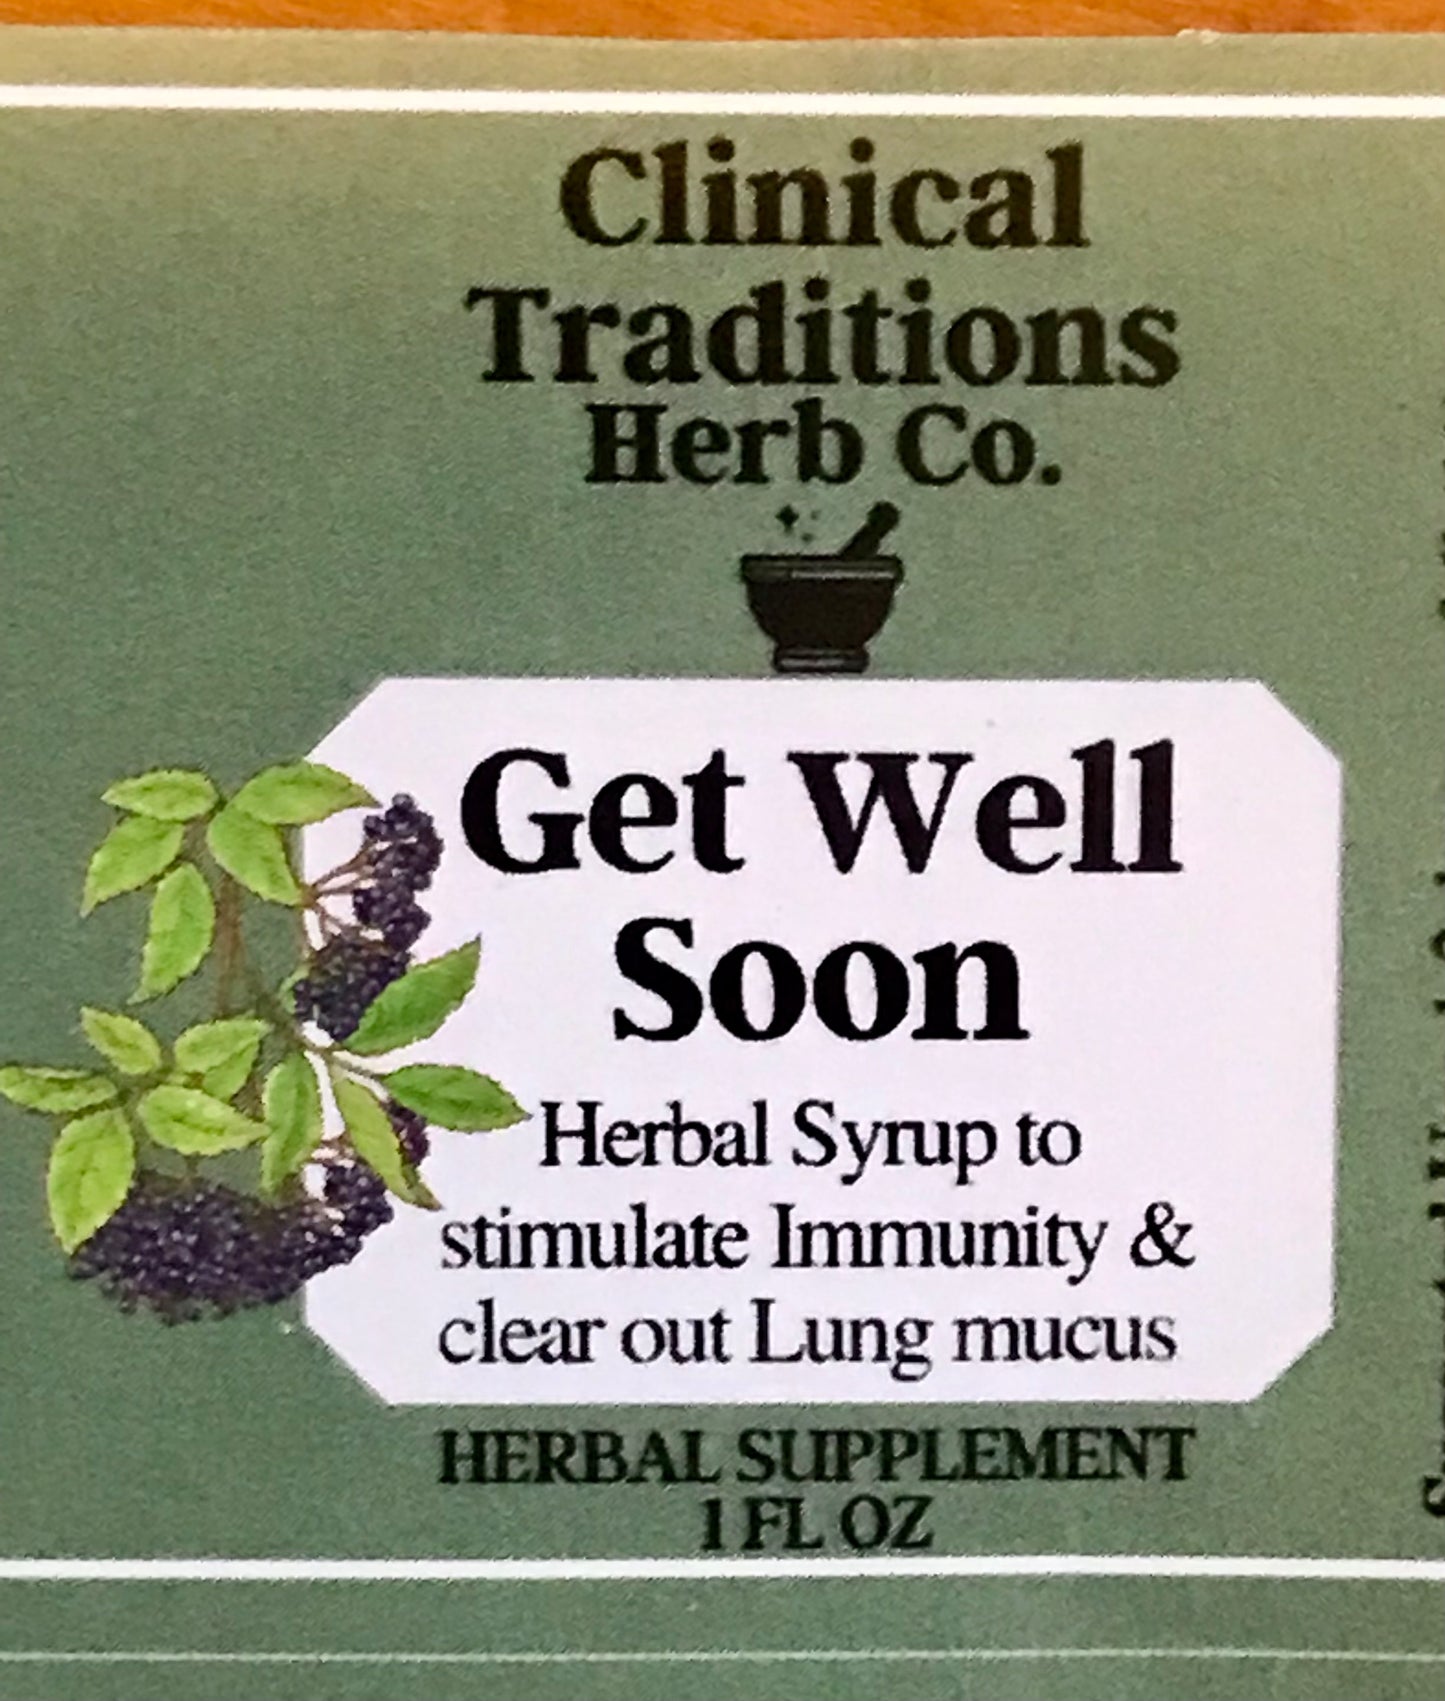 Get Well Soon: herbal cough syrup